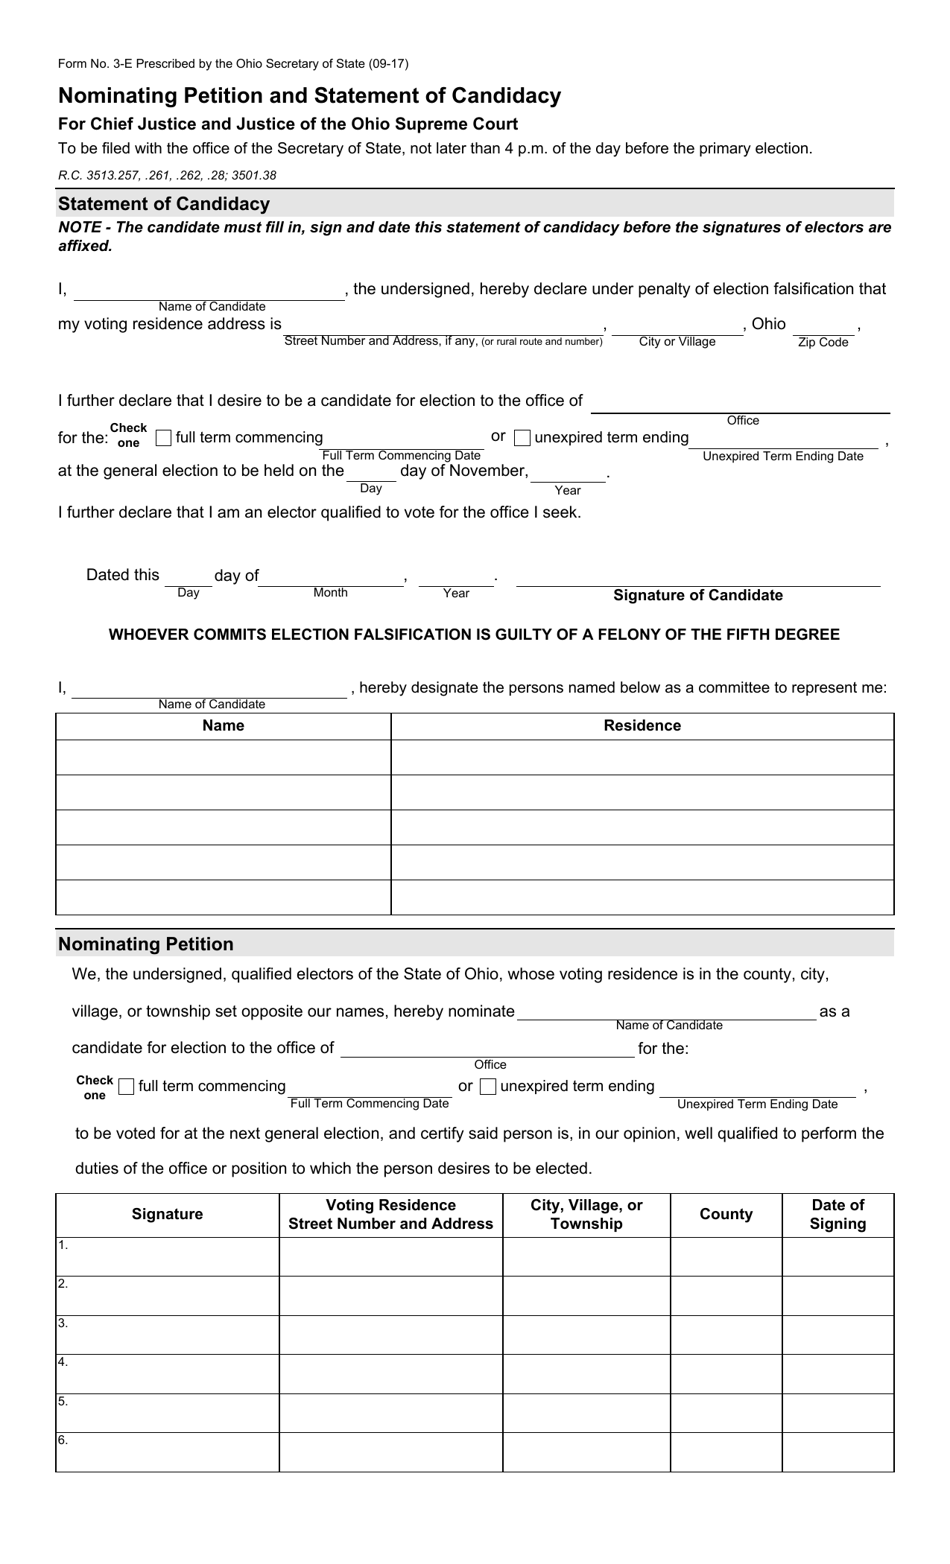 Form 3-E Nominating Petition and Statement of Candidacy for Chief Justice and Justice of the Ohio Supreme Court - Ohio, Page 1